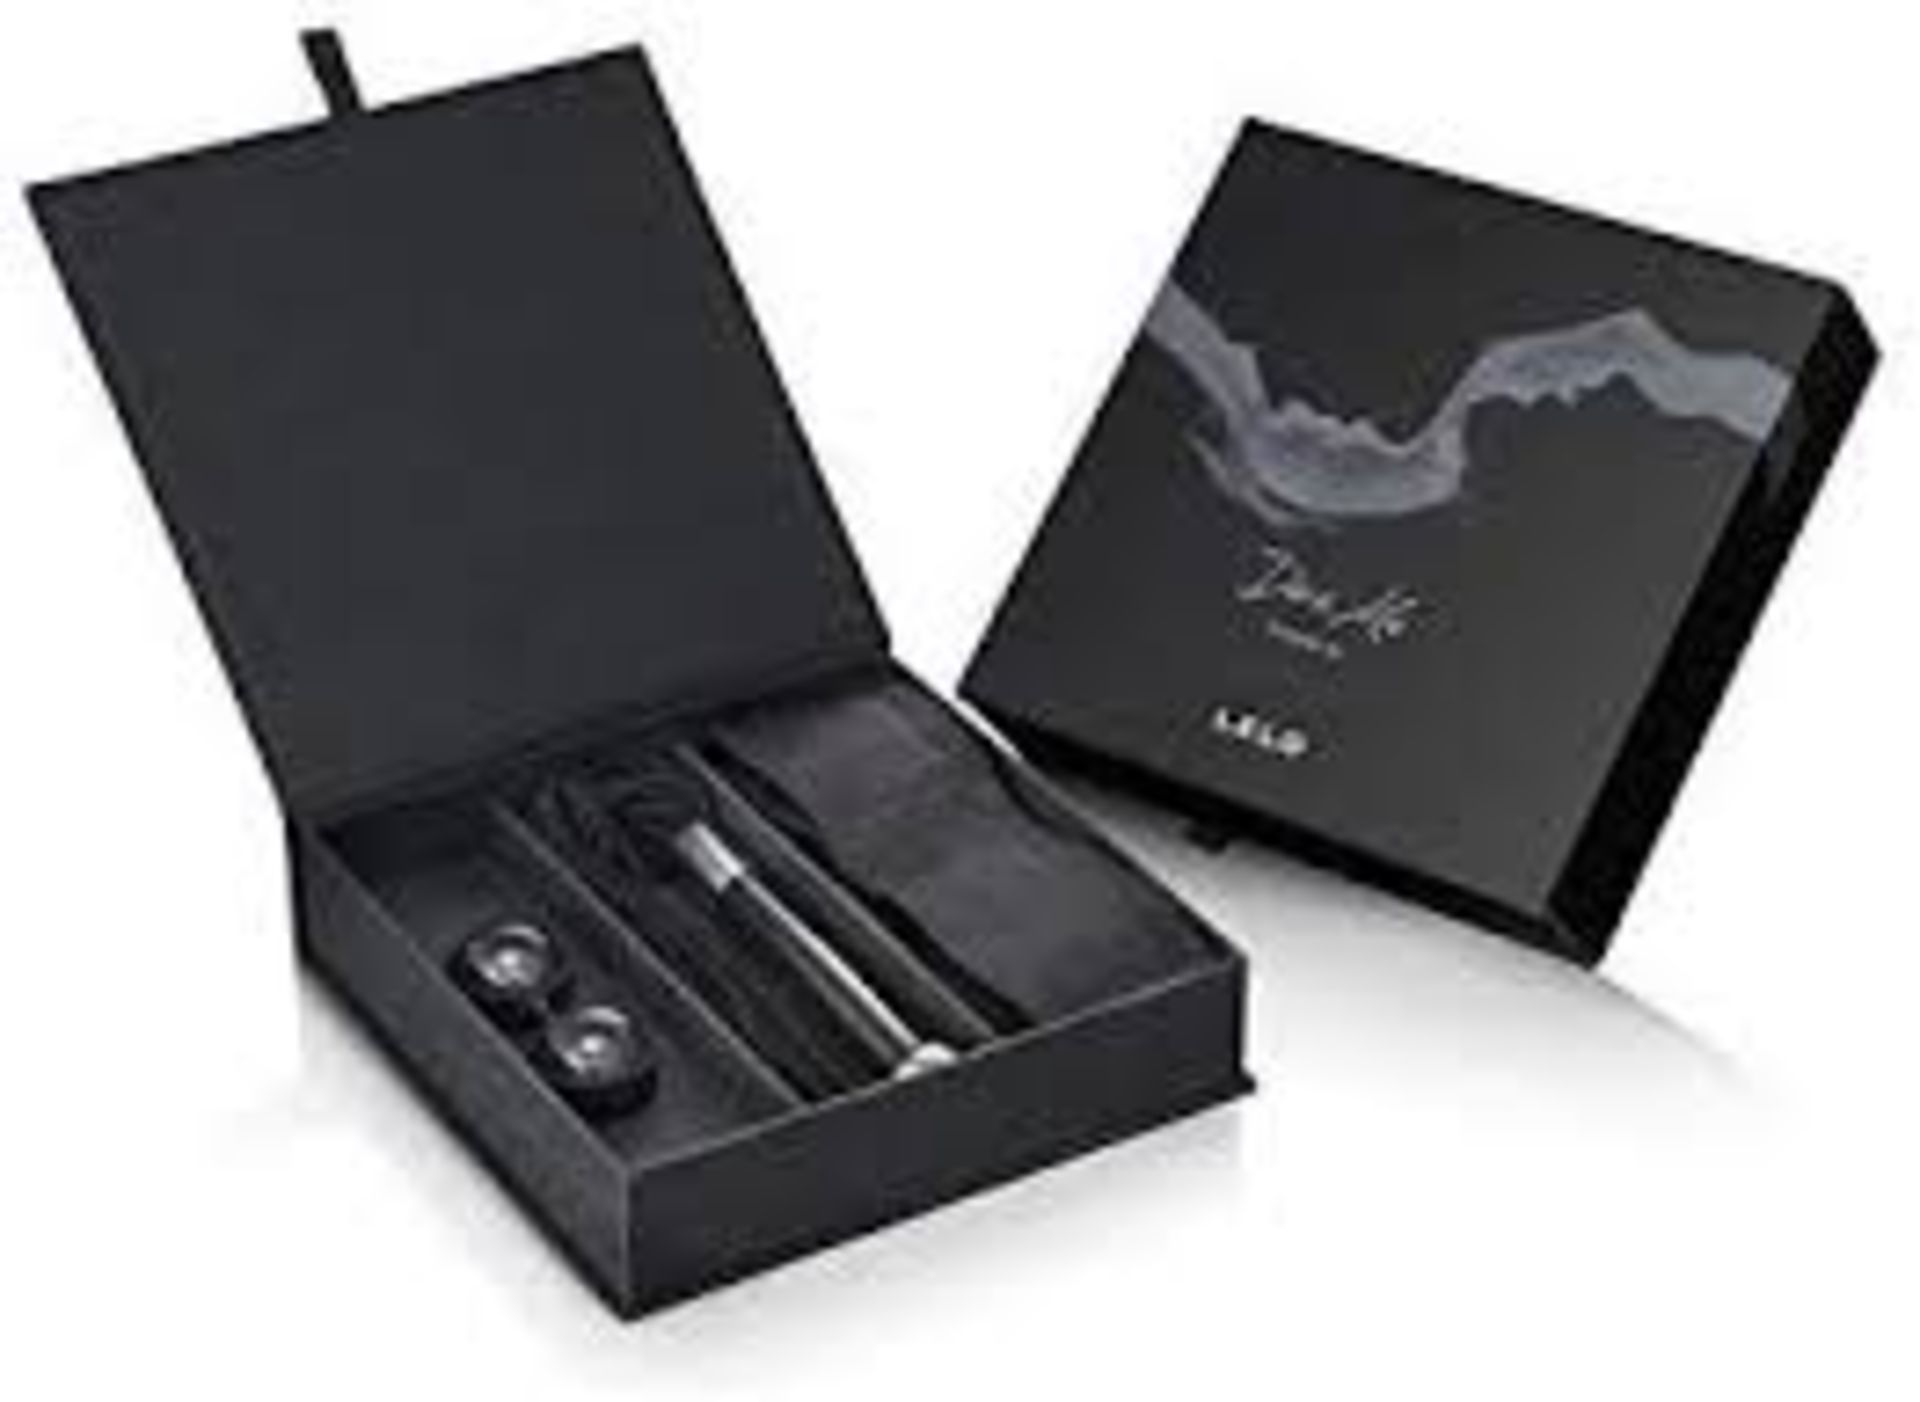 Boxed Lelo 'Dare Me' Pleasure Set RRP £170 (Appraisals Are Available Upon Request)(Pictures Are